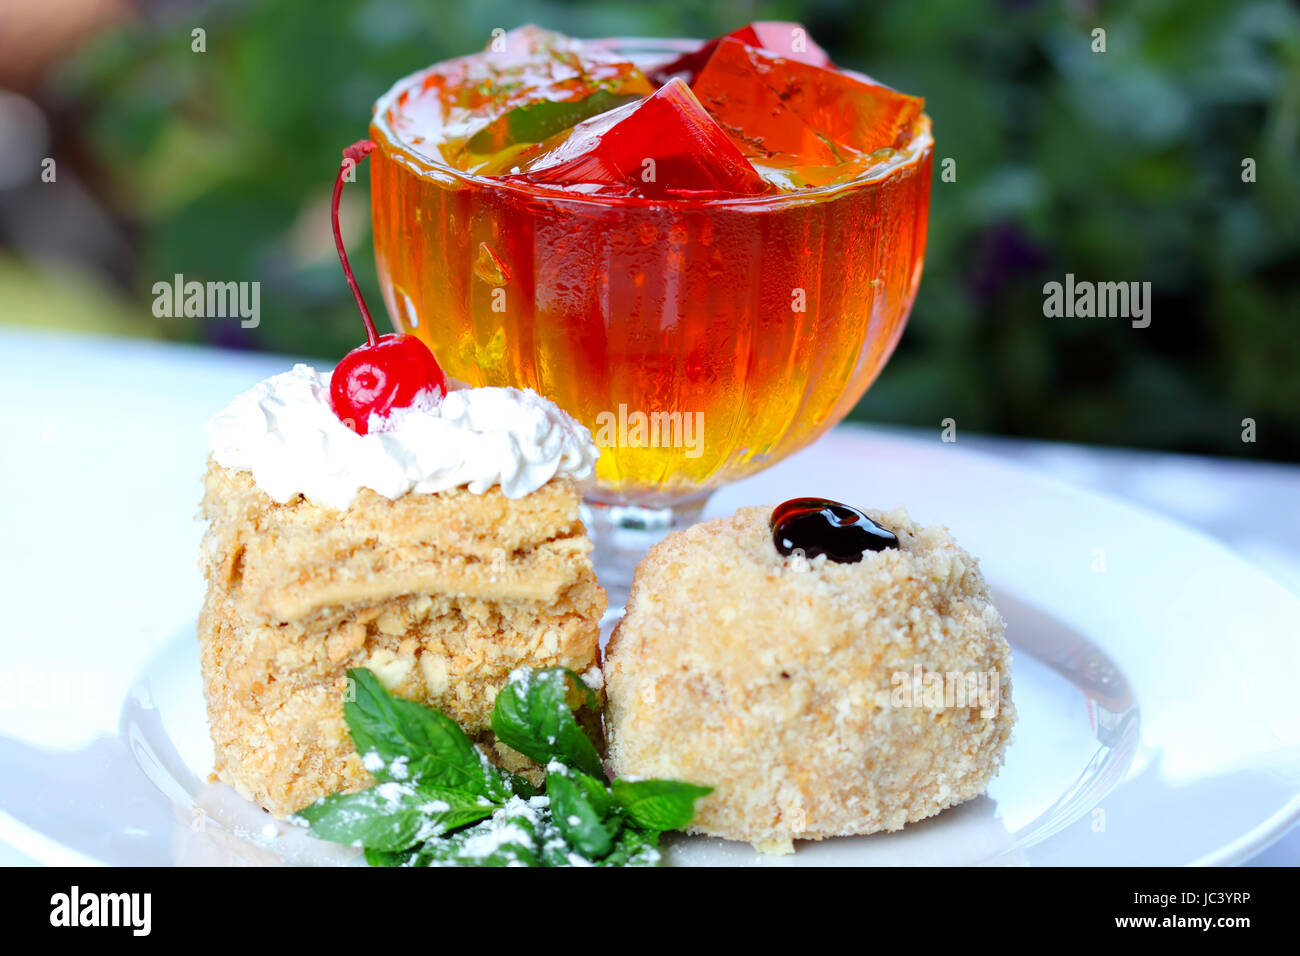 Sweet jelly and pastry dessert (closup, selective focus) Stock Photo